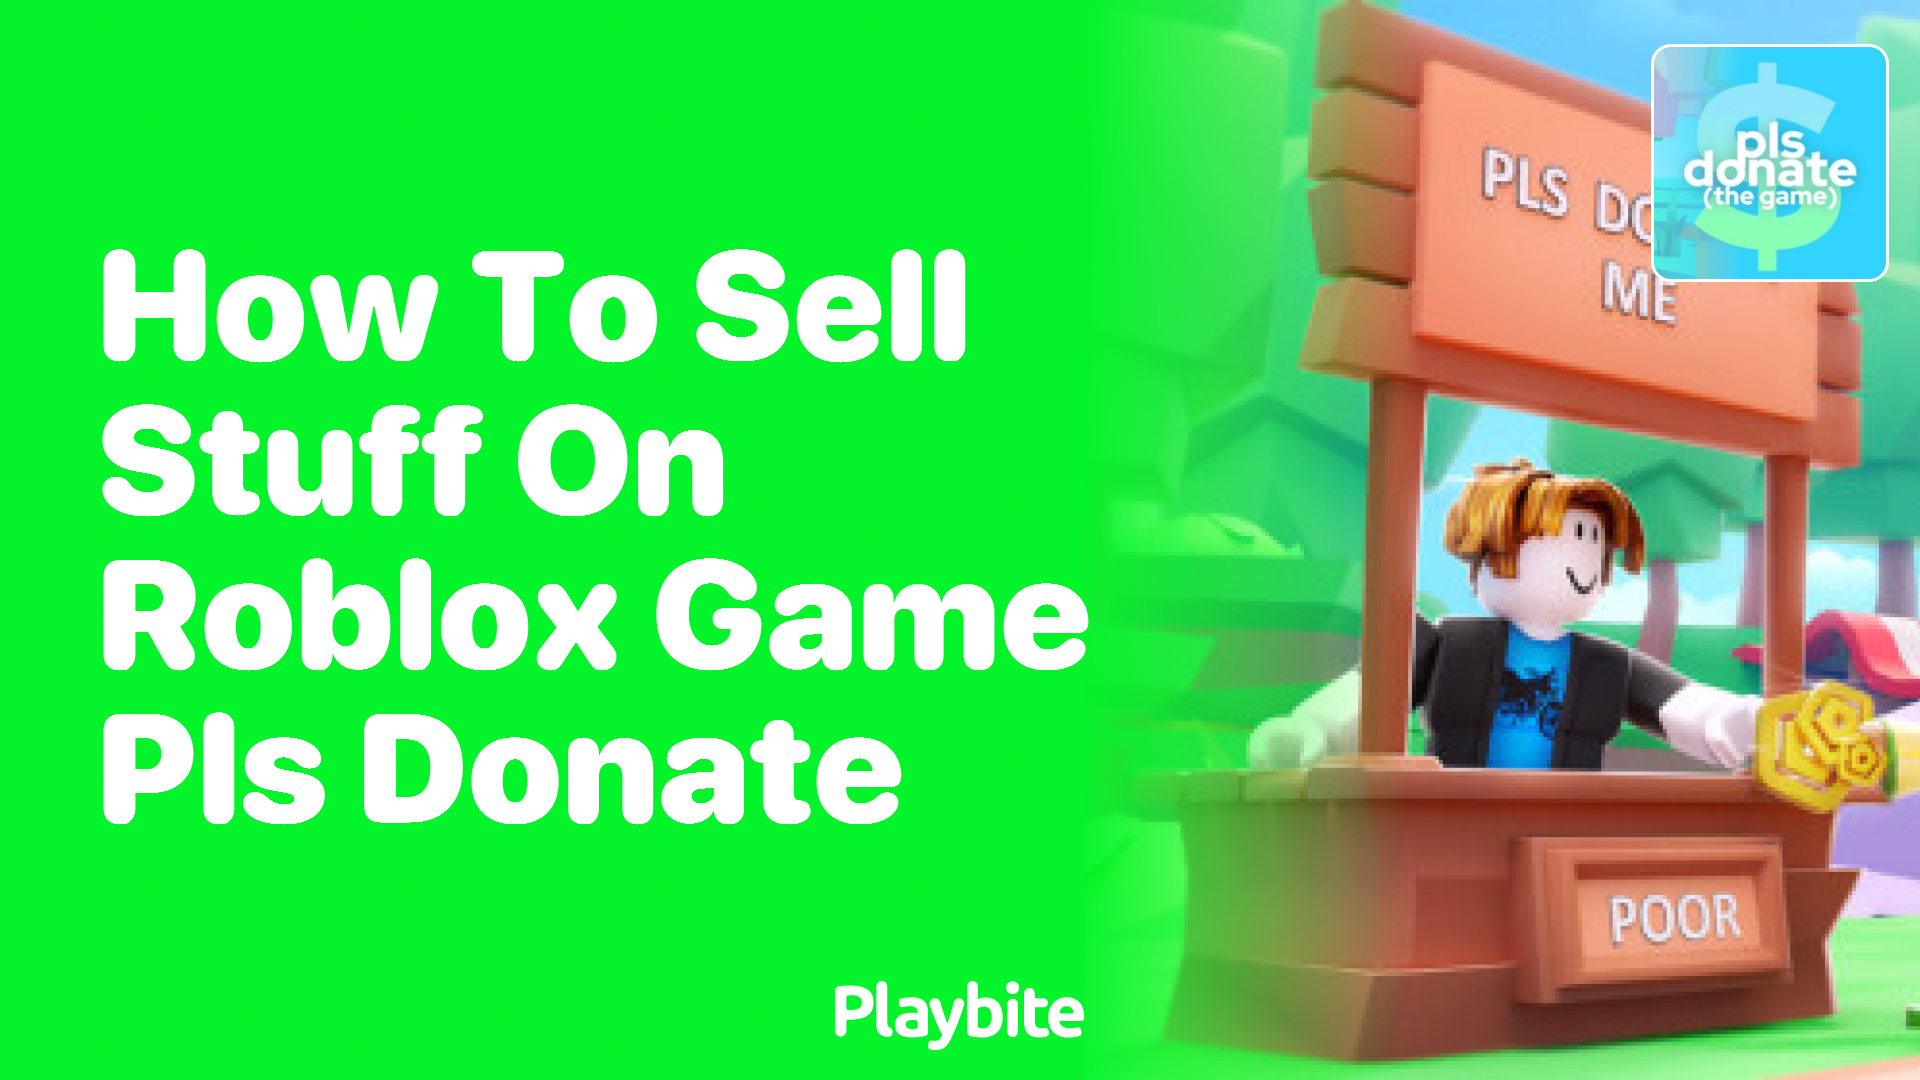 How to Sell Stuff on Roblox Game PLS DONATE